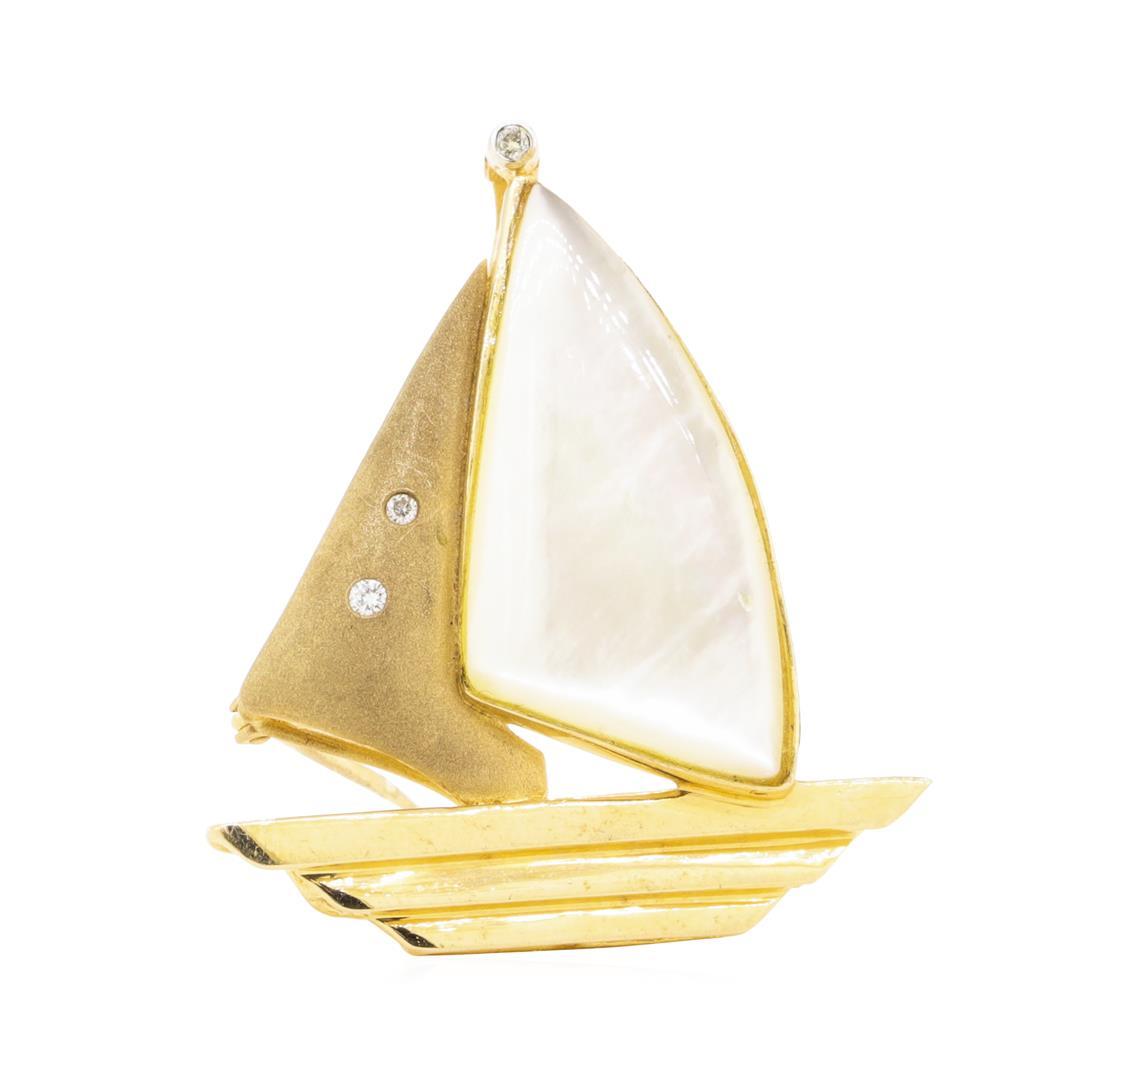 0.06 ctw Diamond and Mother of Pearl Boat Enhancer/Pin - 14KT Yellow Gold